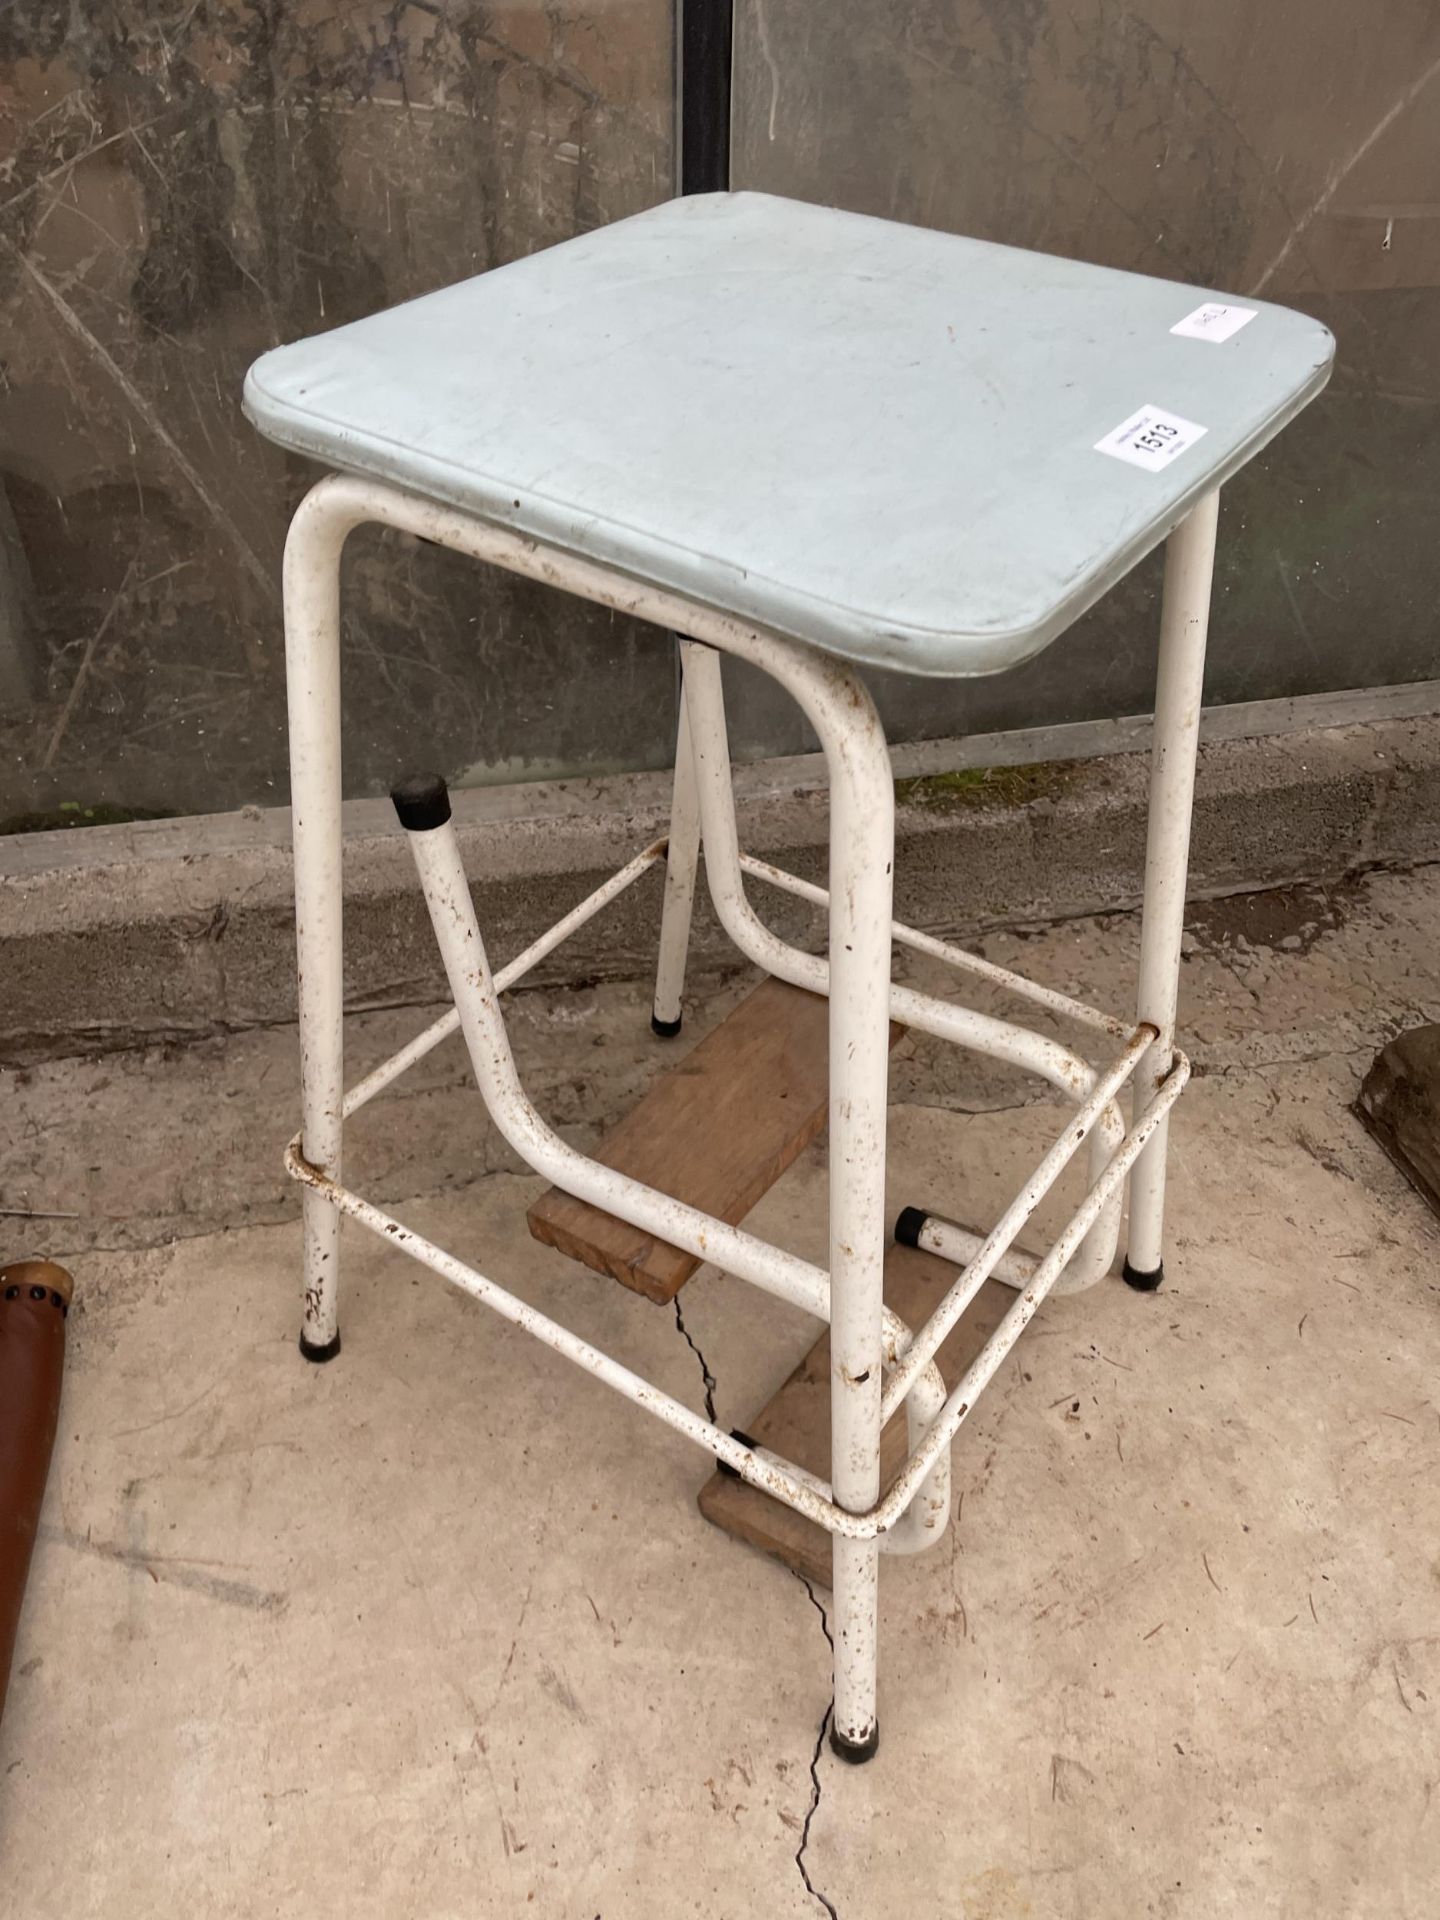 A RETRO METAL FRAMED KITCHEN STEP STOOL - Image 2 of 2